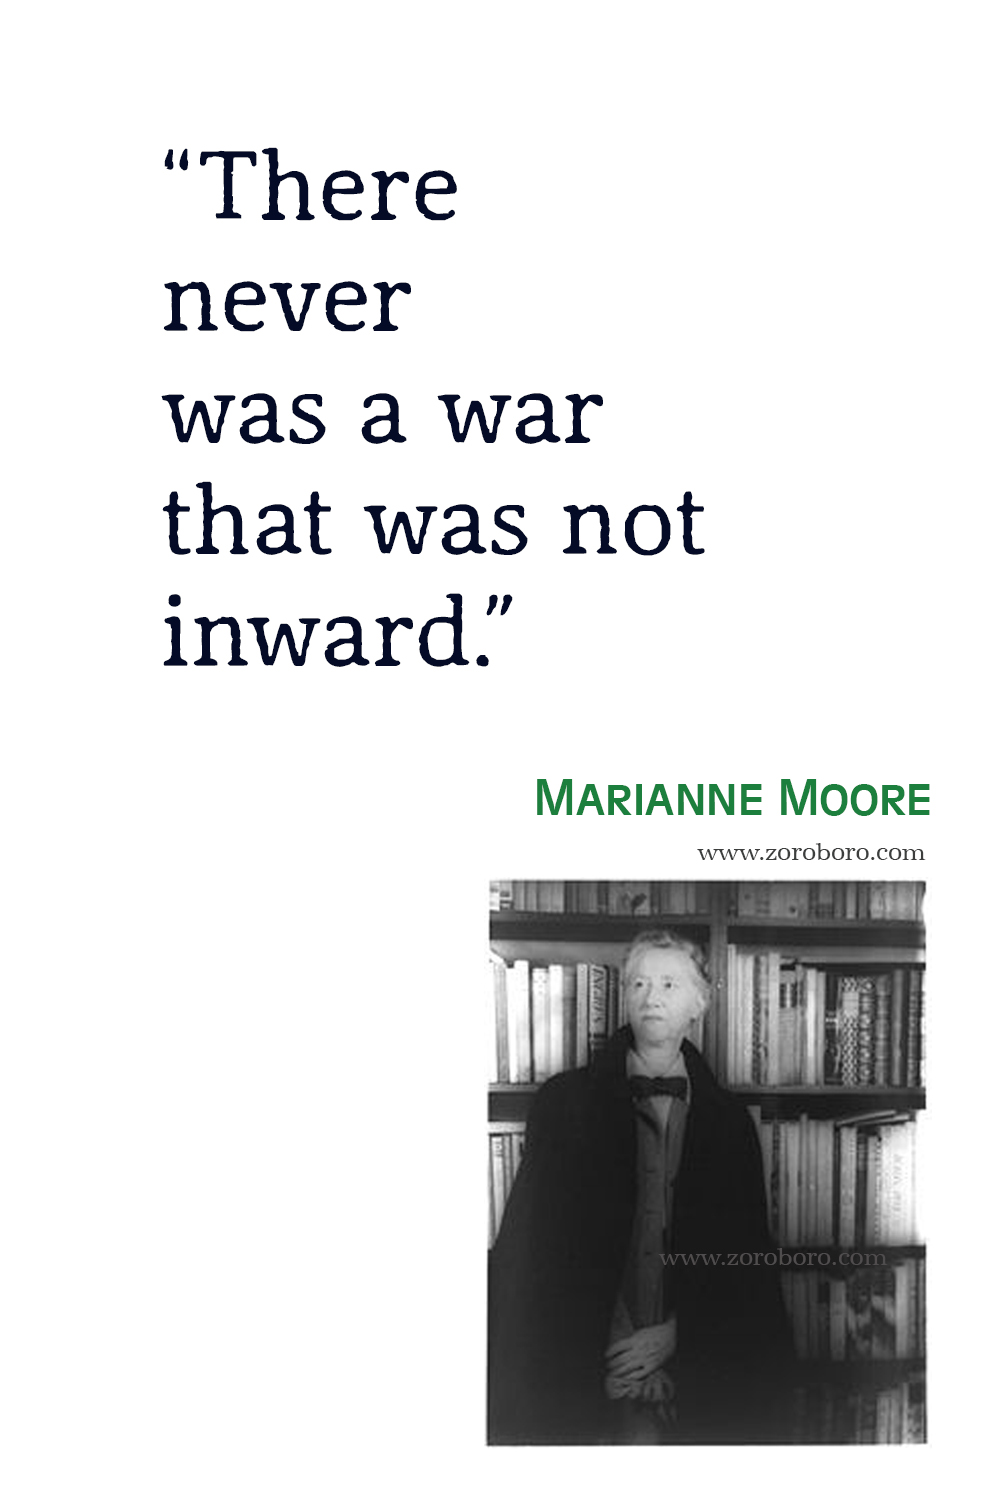 Marianne Moore Quotes, Marianne Moore Poems, Marianne Moore Poetry, Marianne Moore Books Quotes, Marianne Moore Selected Poems.